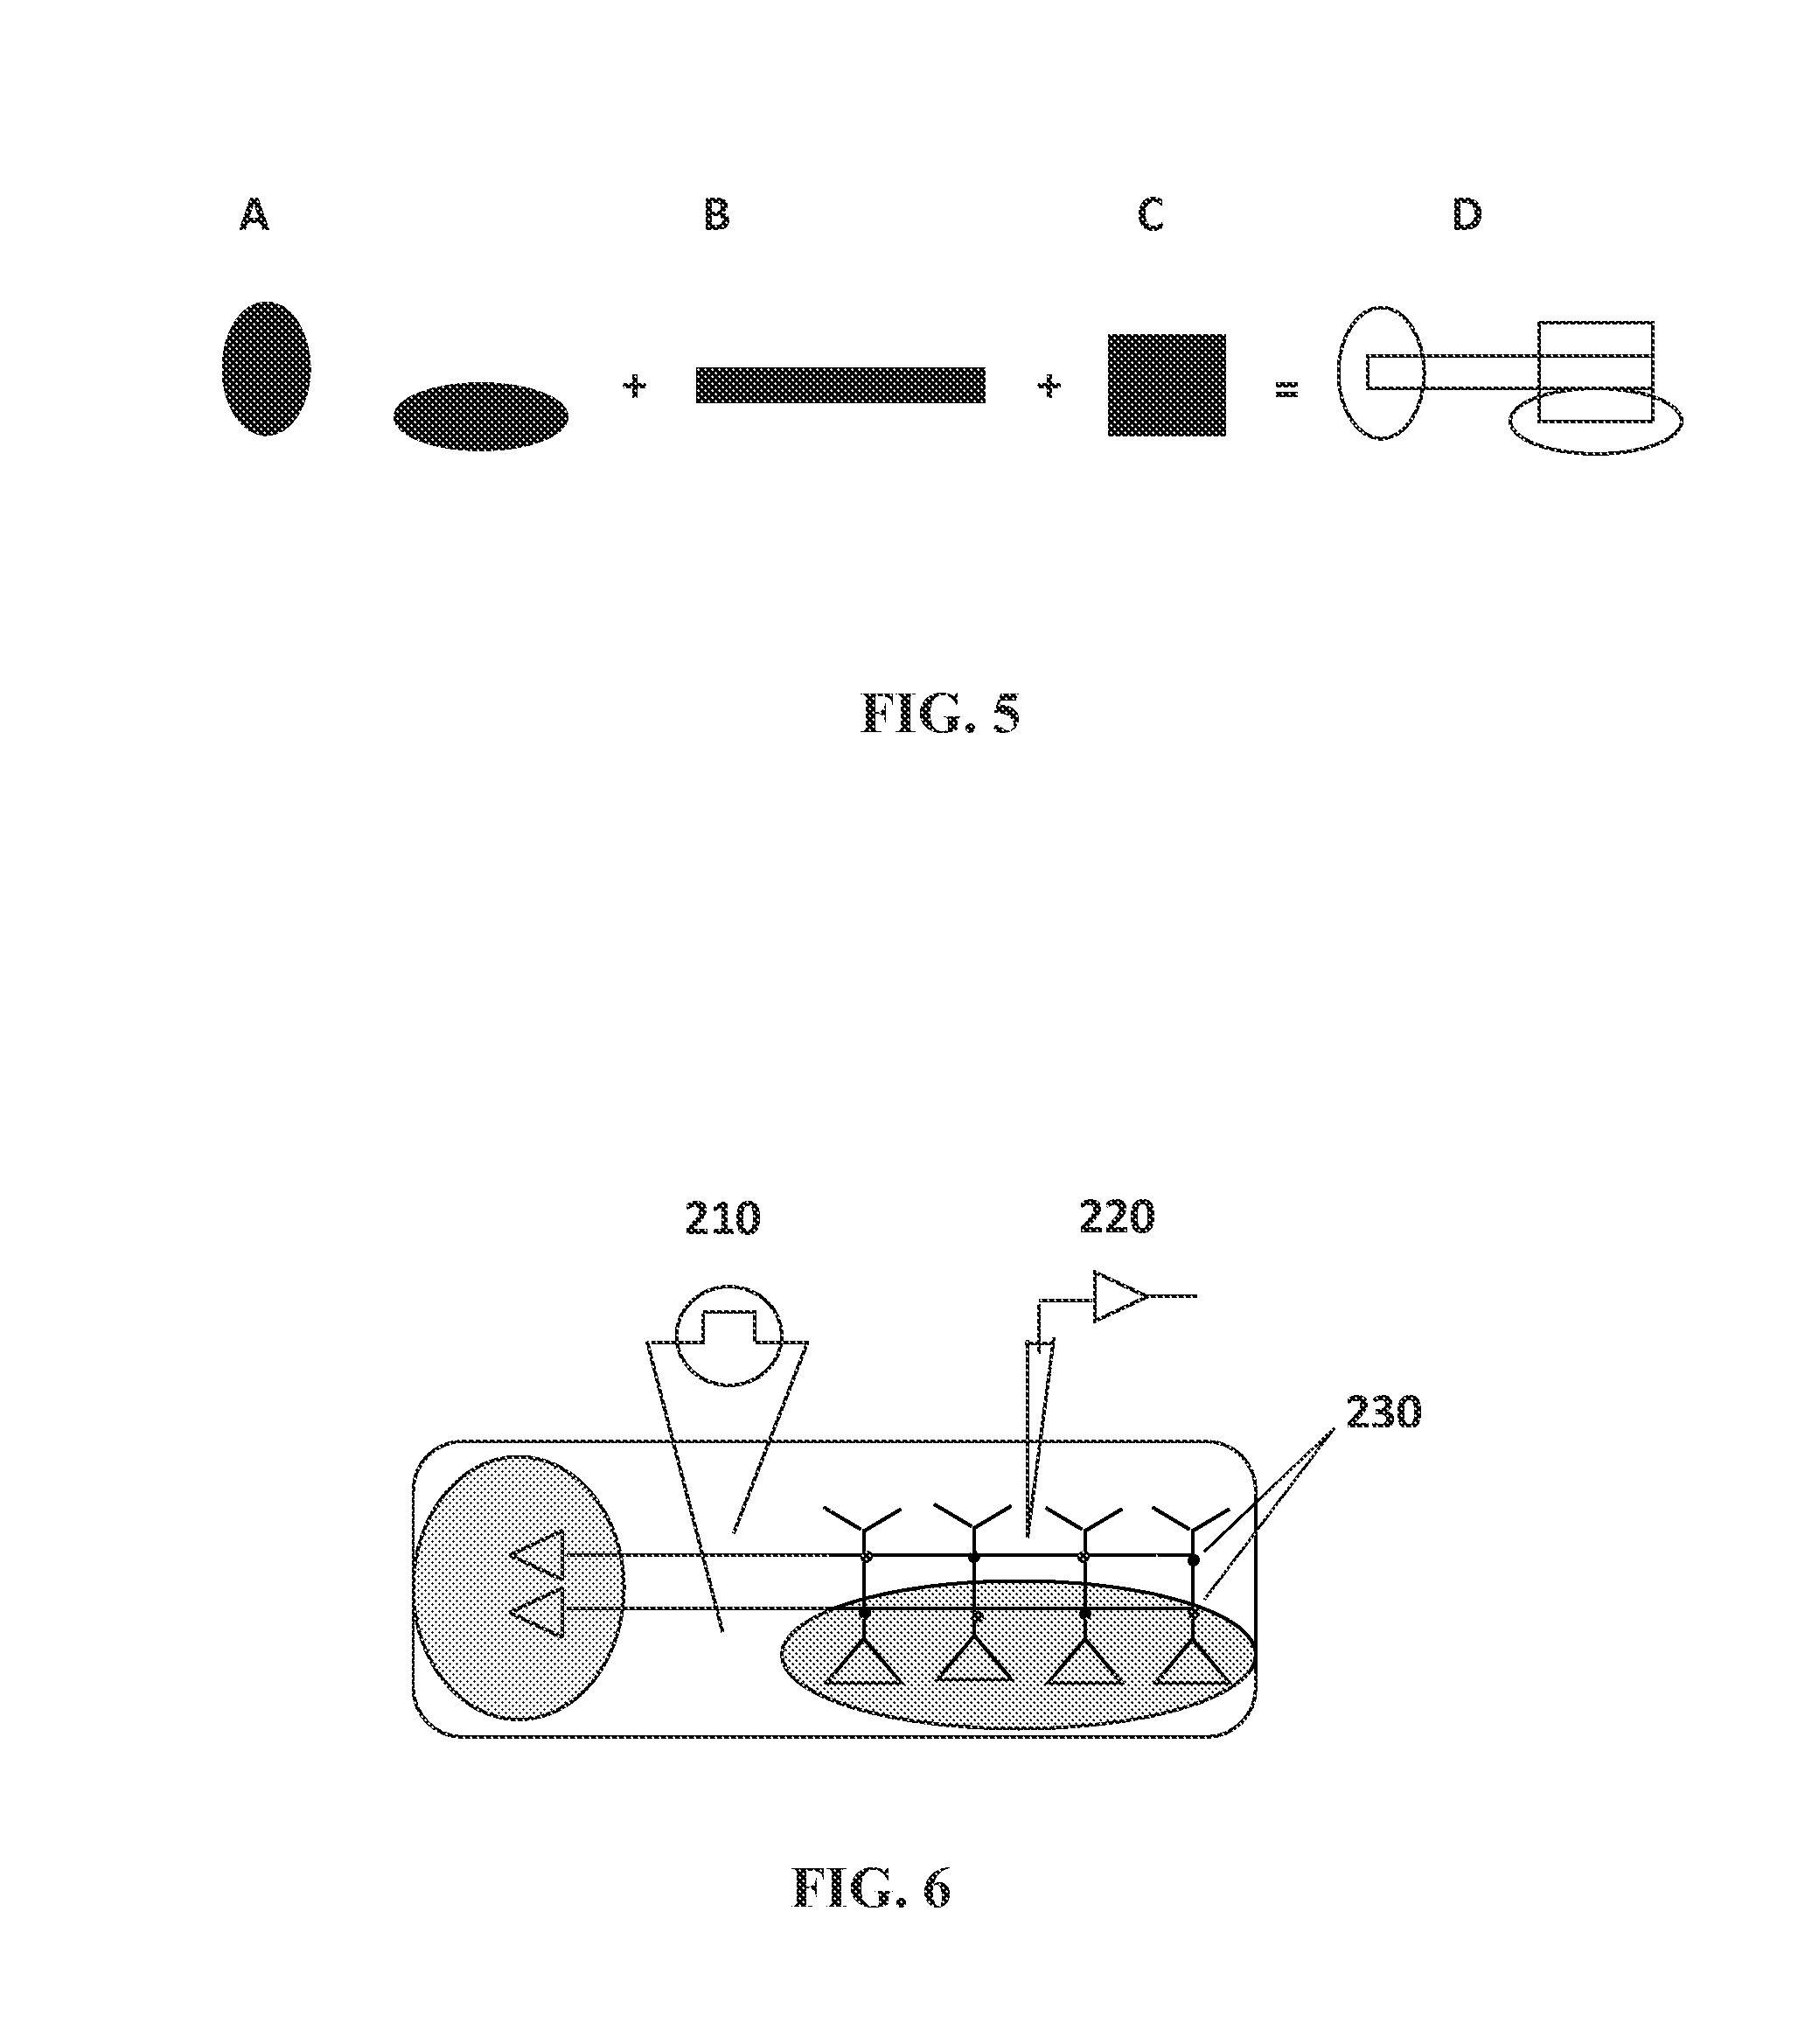 Tissue scaffolds for electrically excitable cells